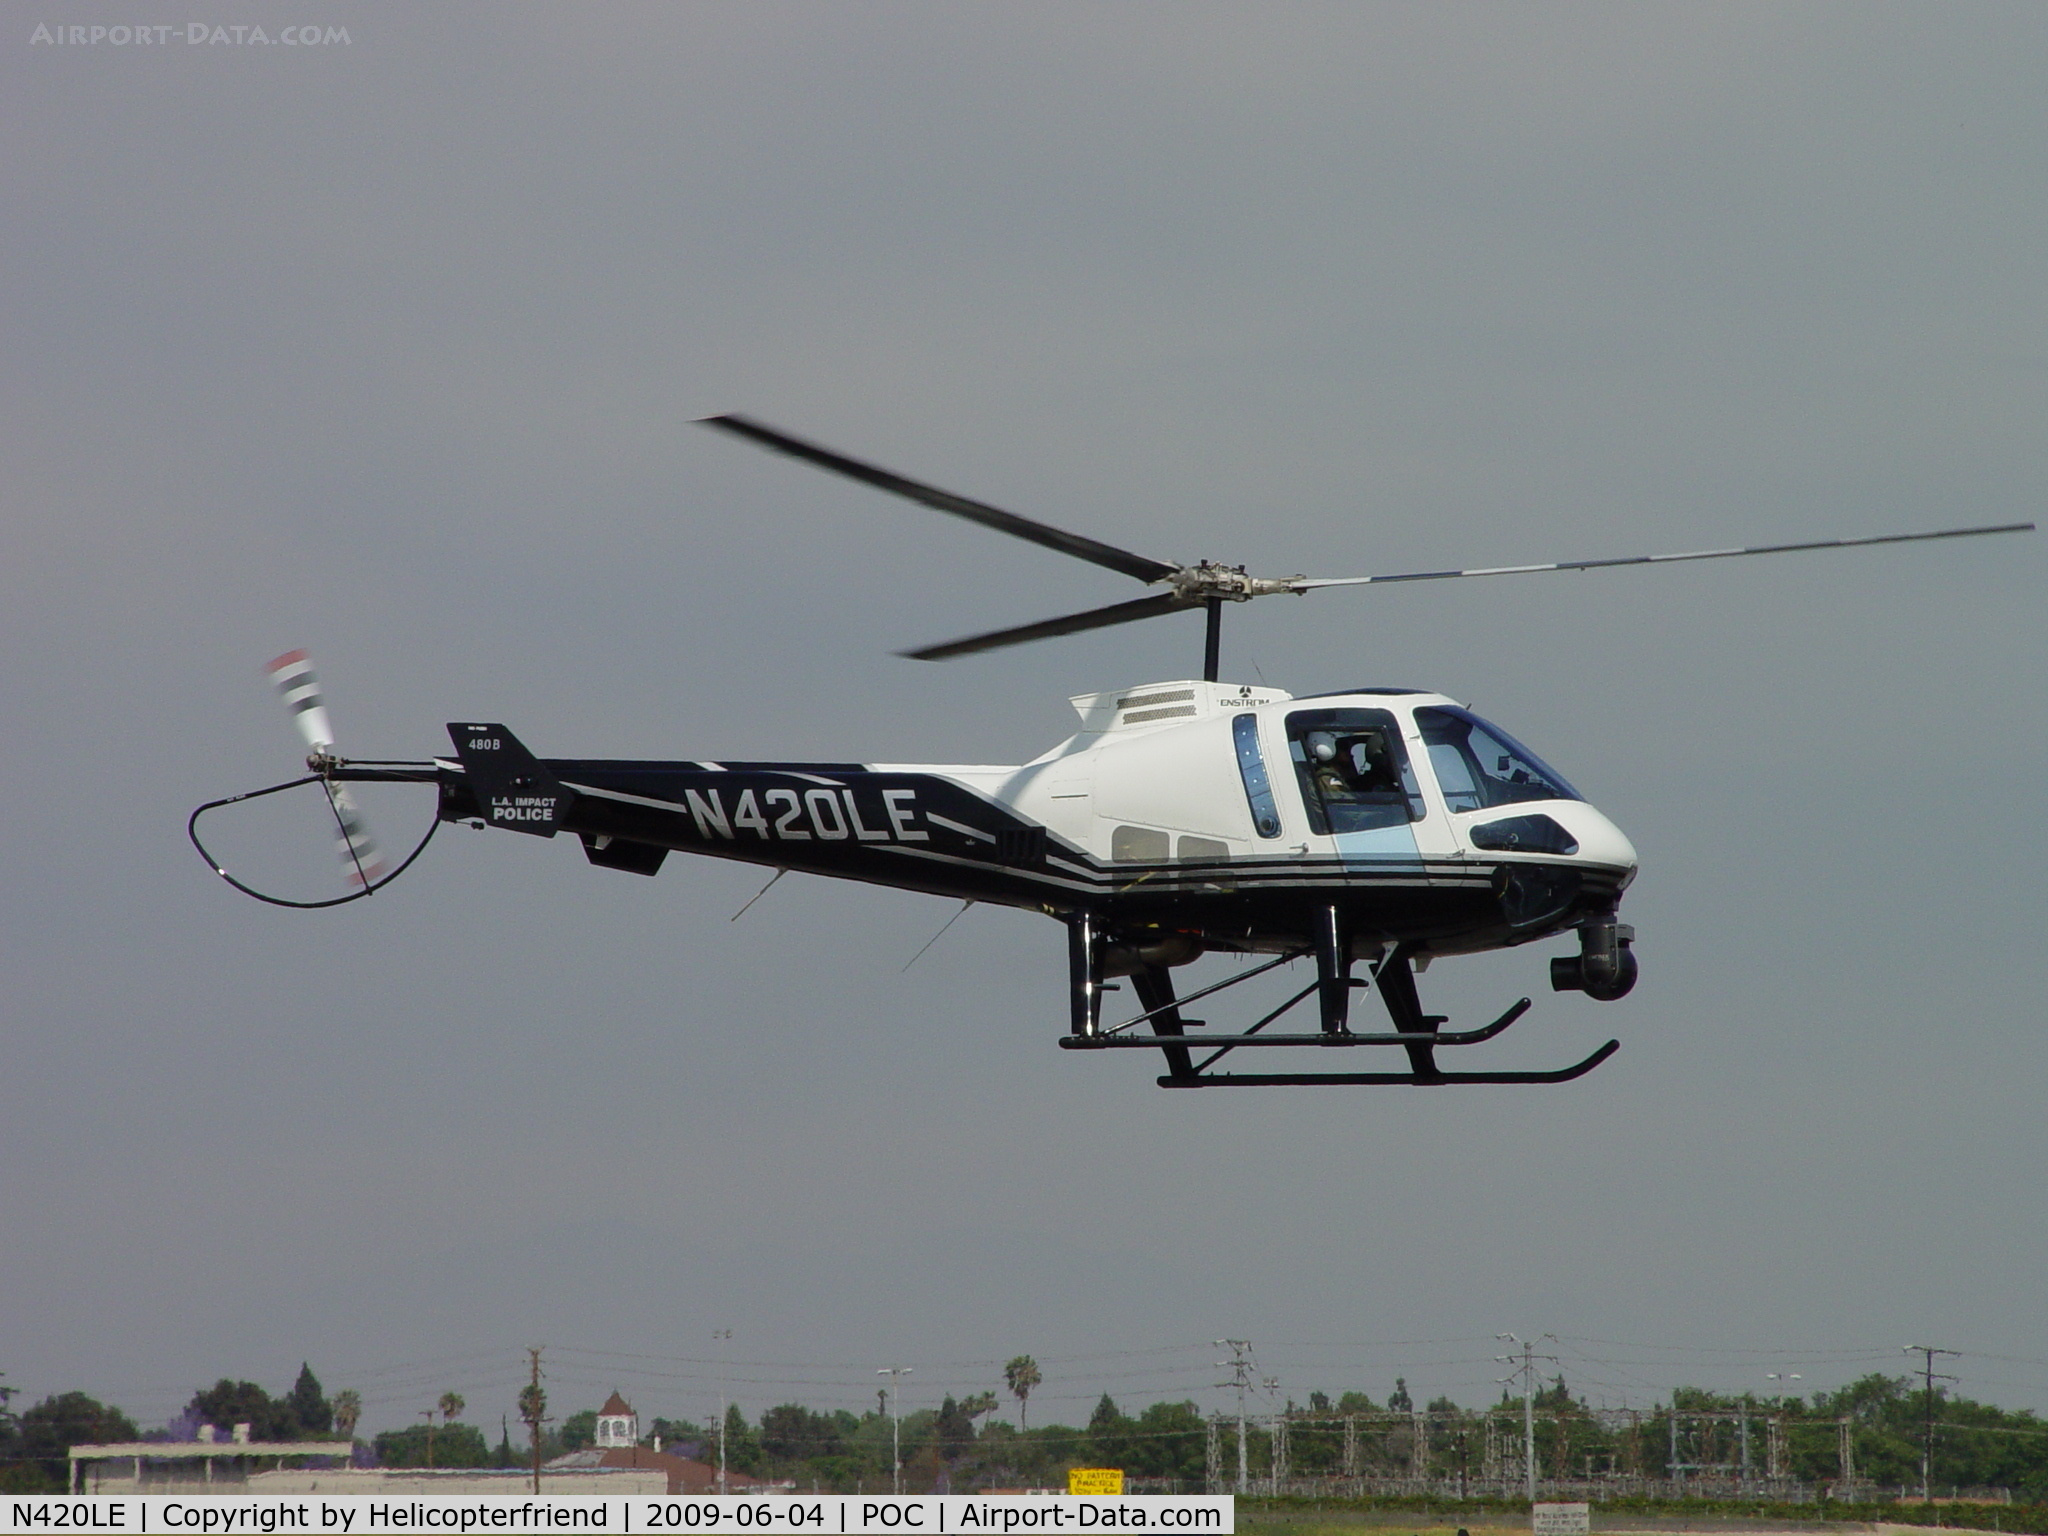 N420LE, 2006 Enstrom 480B C/N 5101, Heading to Eagle Helicopter for fuel